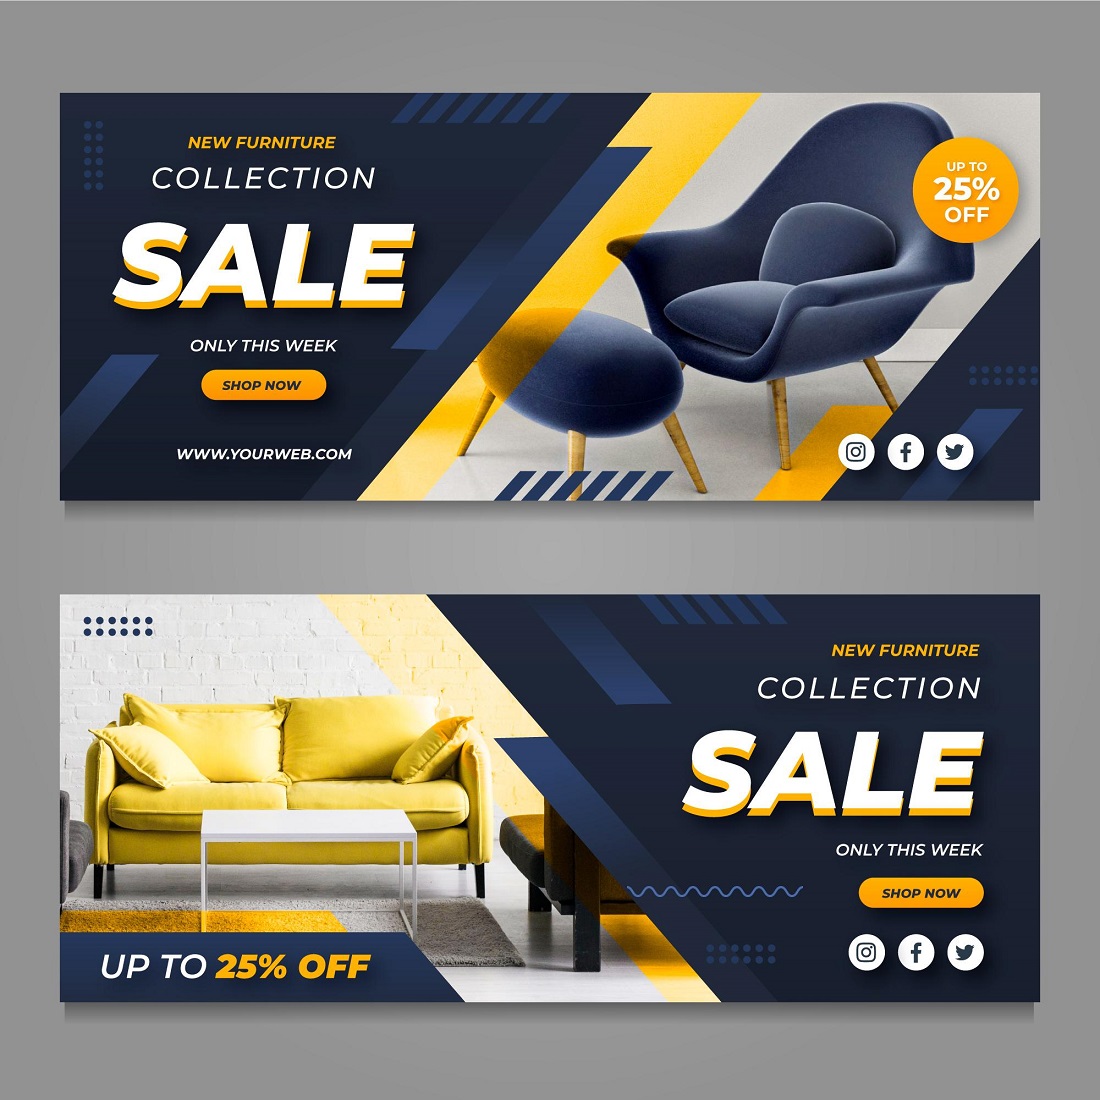 Furniture sale banners cover image.